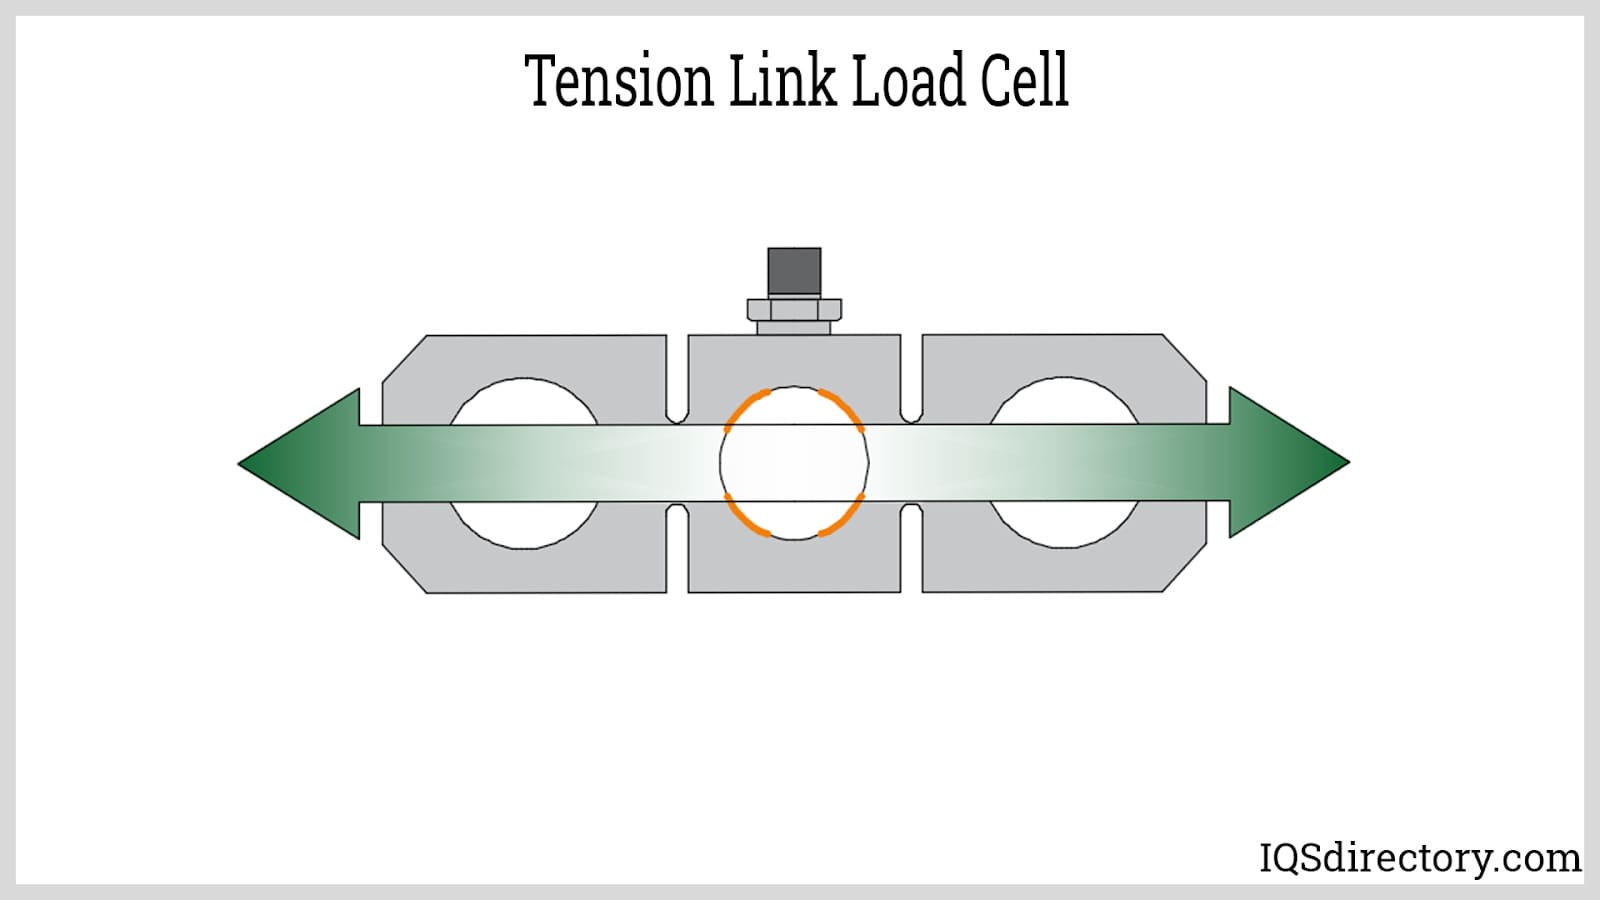 Tension Link Load Cell